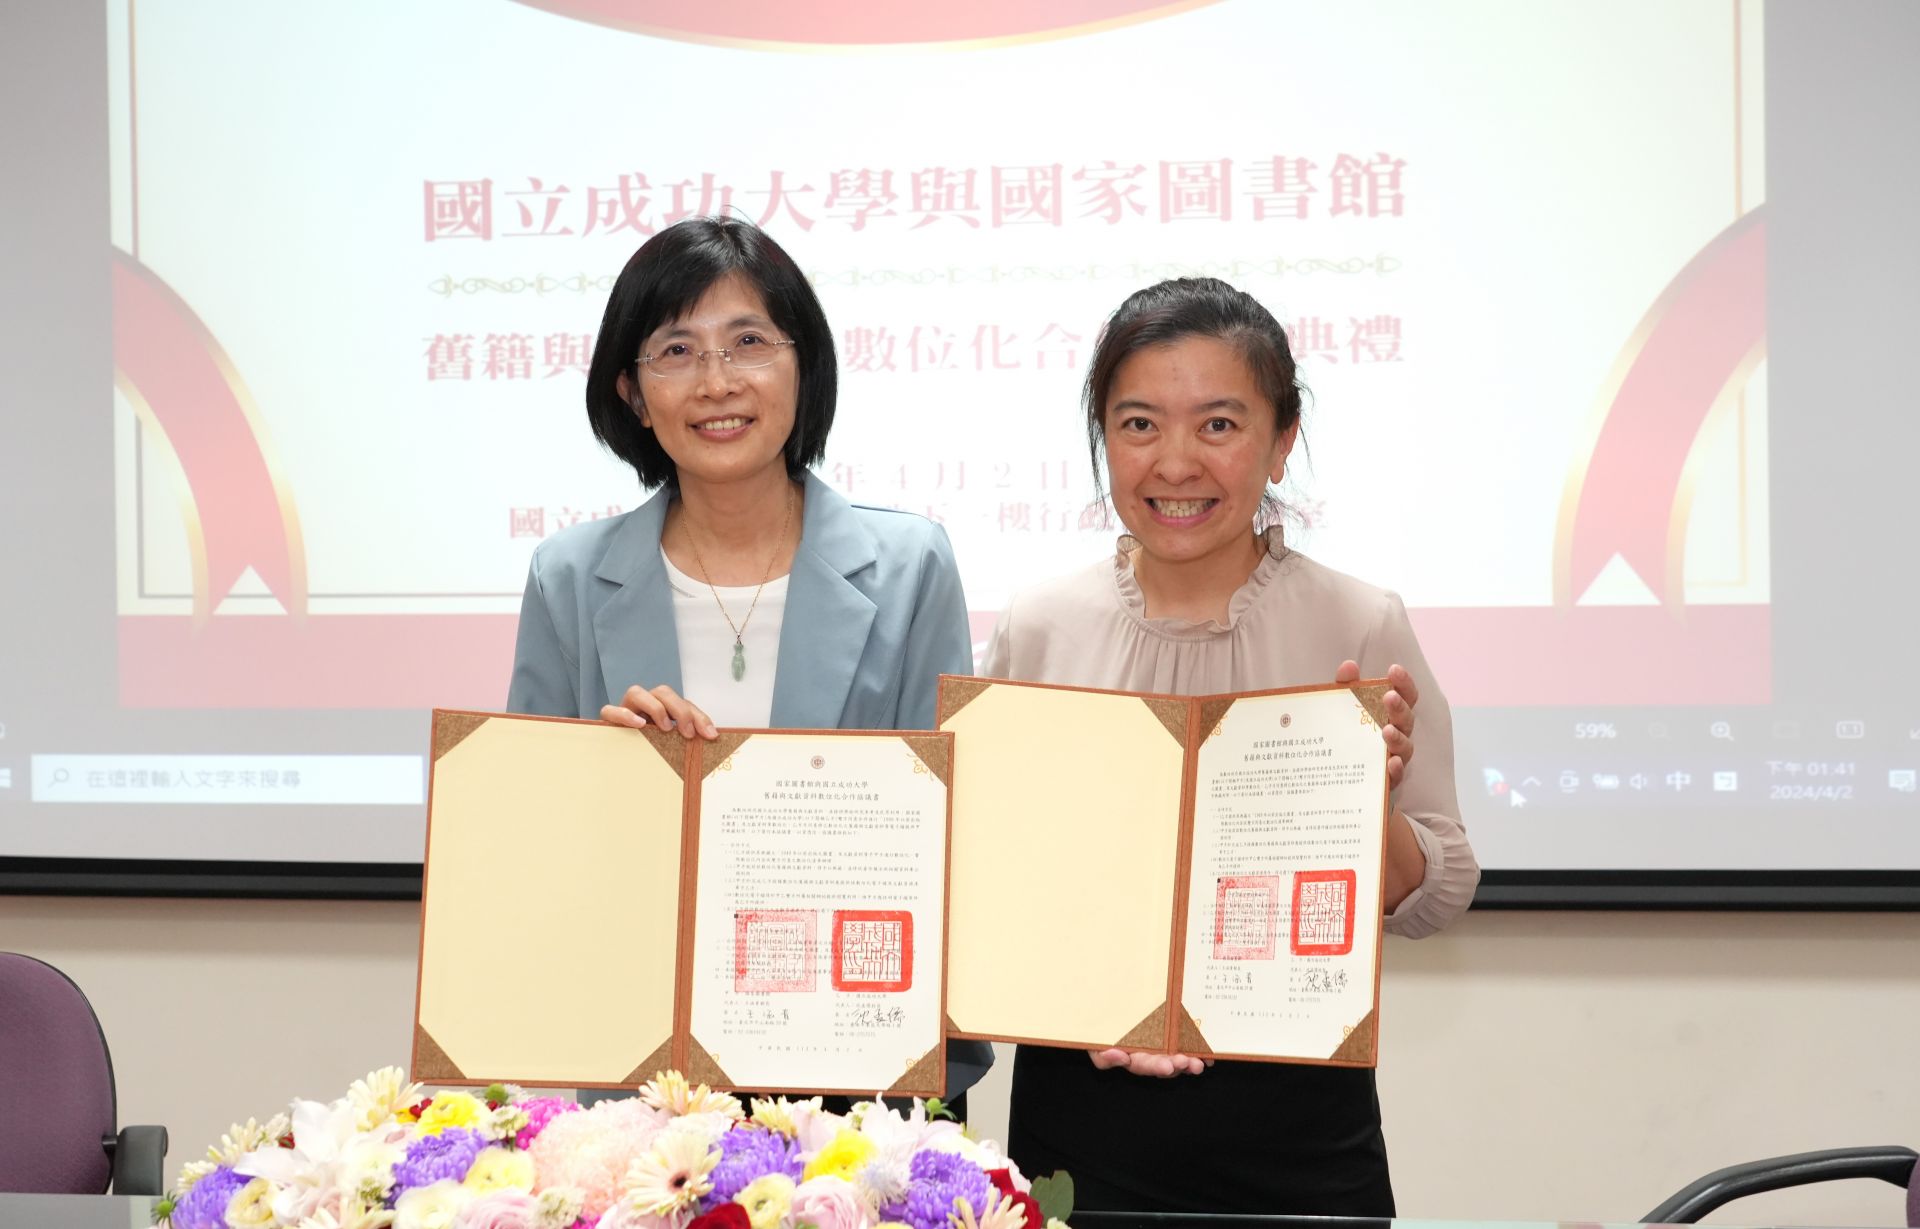 Collaboration Between NCKU and the National Library: Digitizing and Preserving Historical Books and Documents.